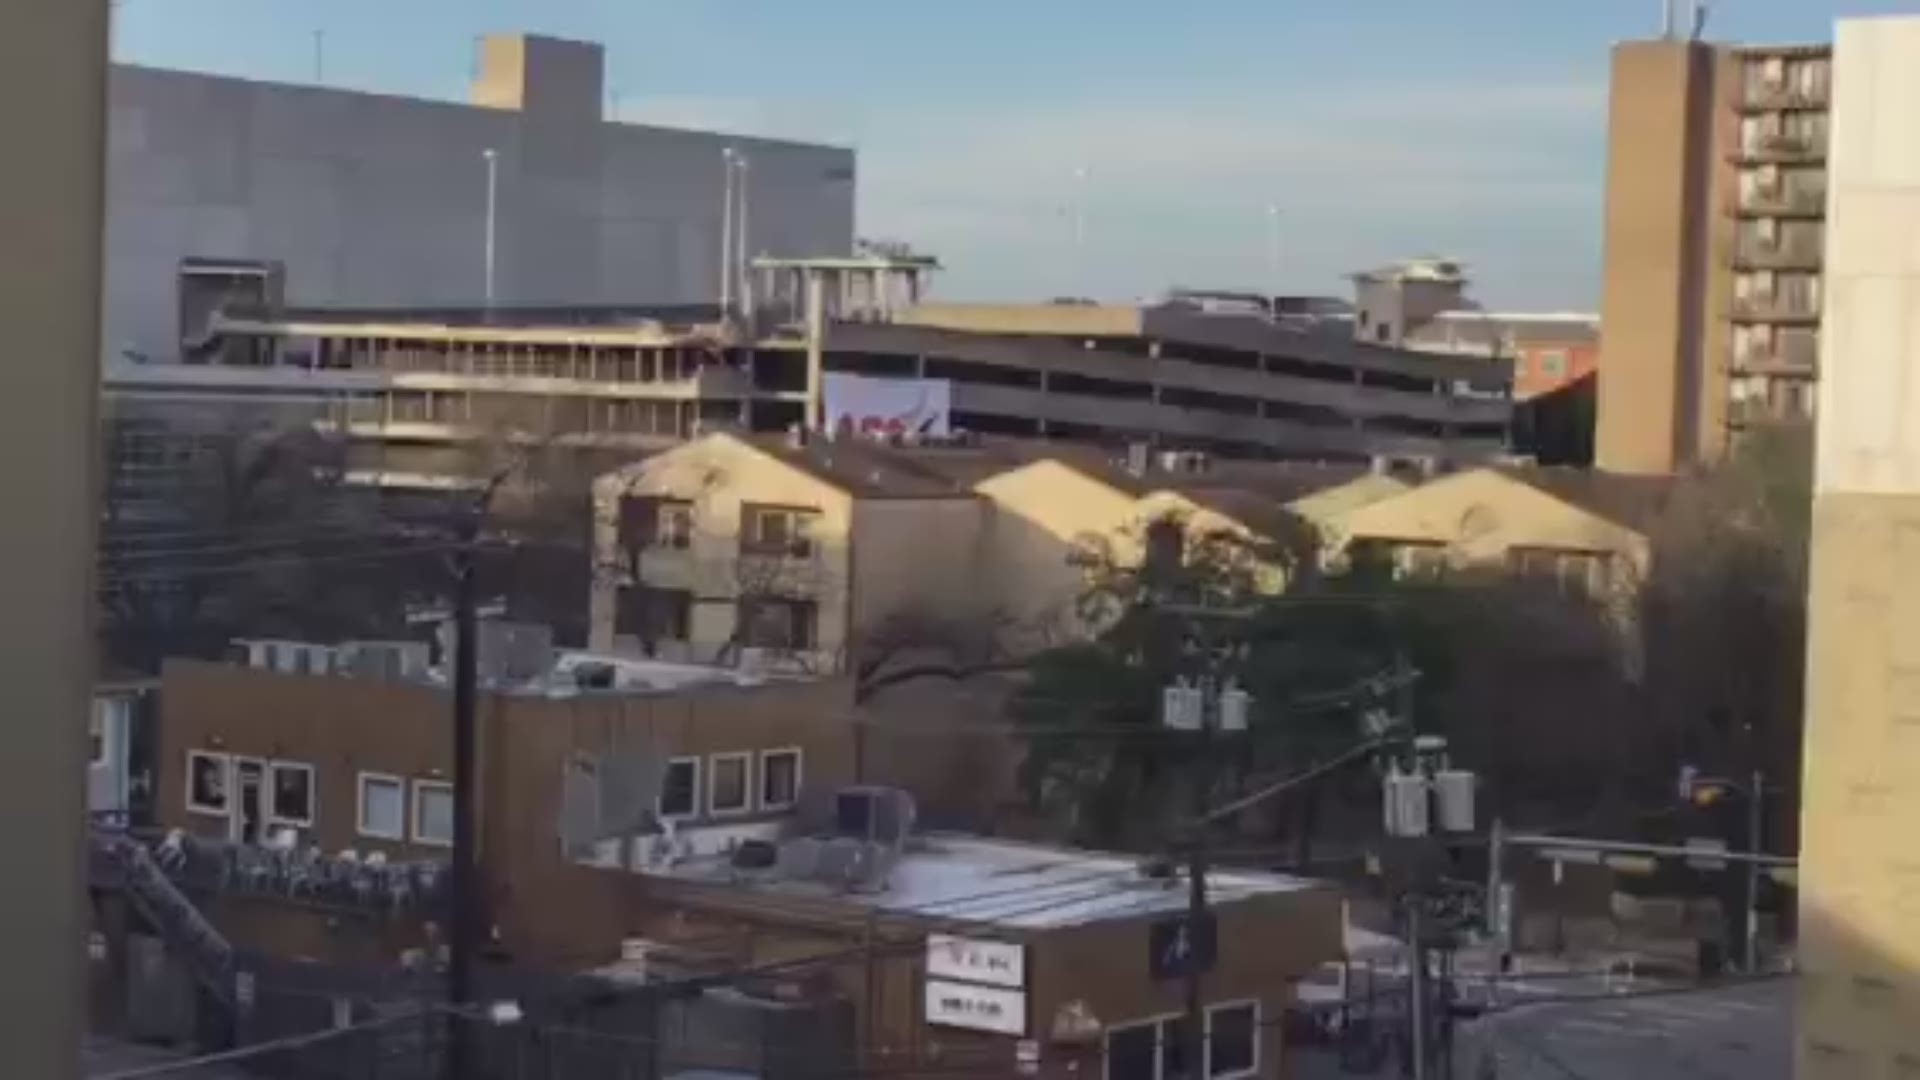 Check out this view of the West Campus garage implosion from above.